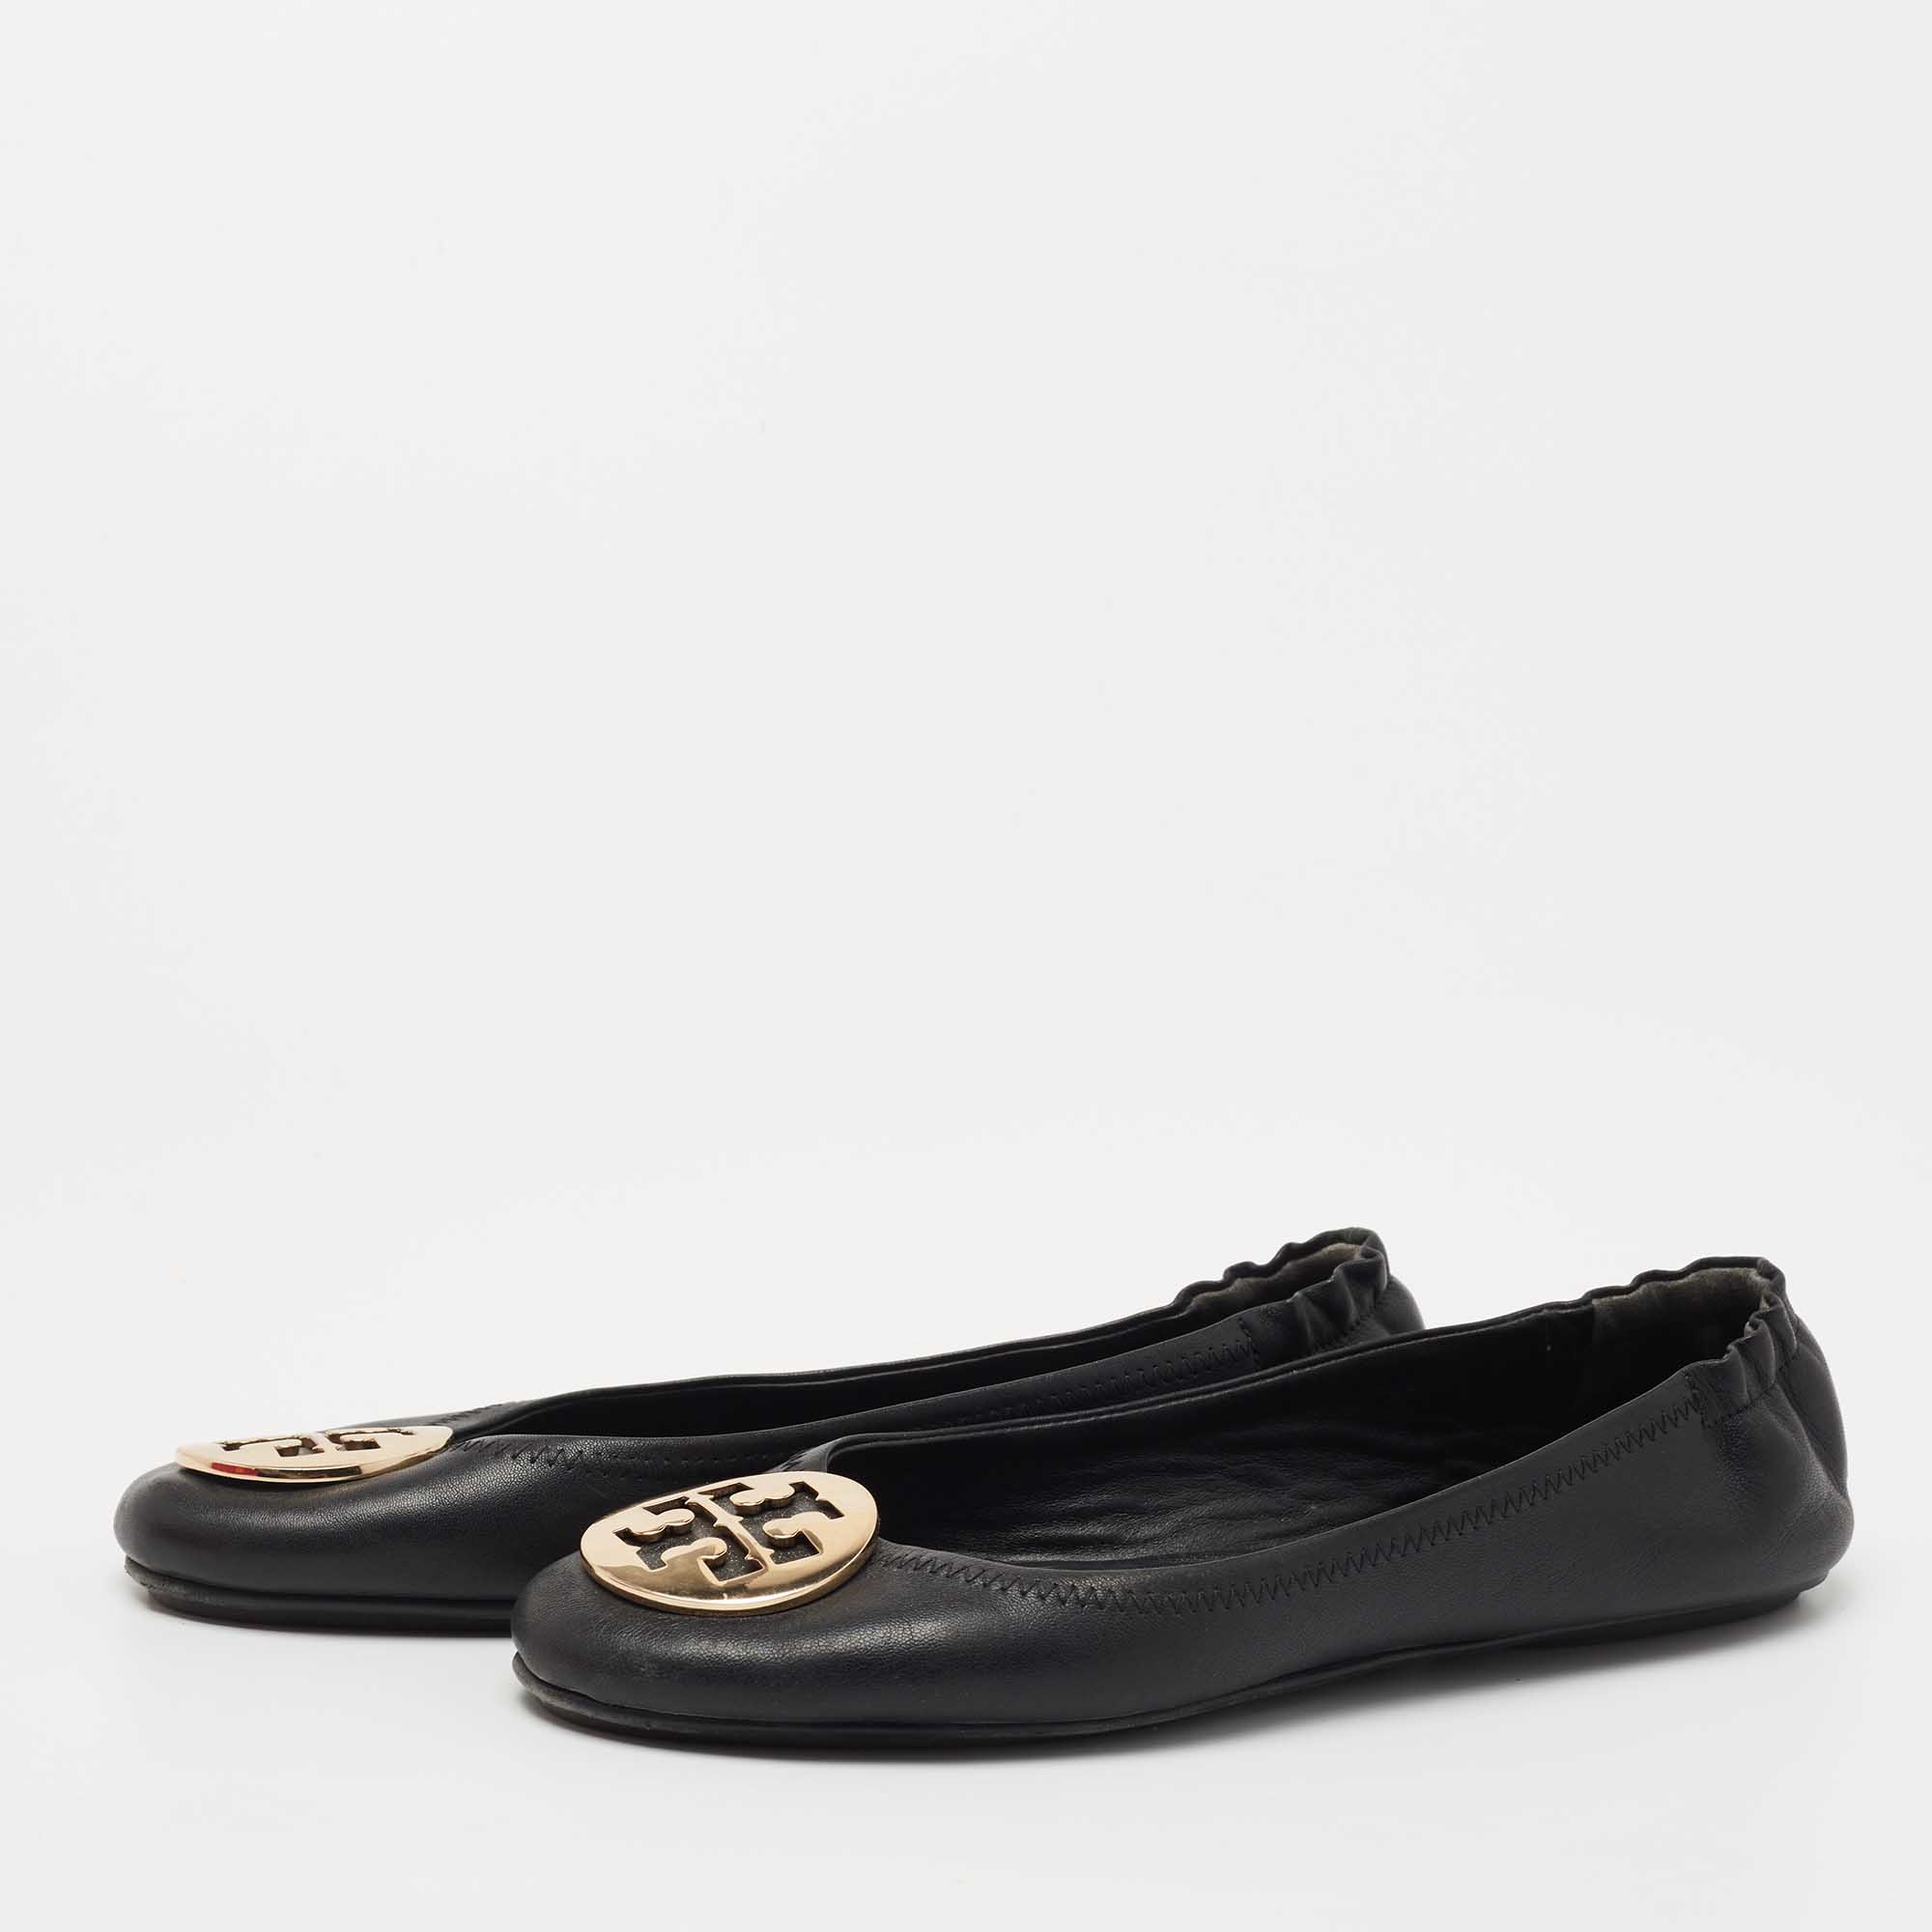 

Tory Burch Black Leather Minnie Travel Ballet Flats Size